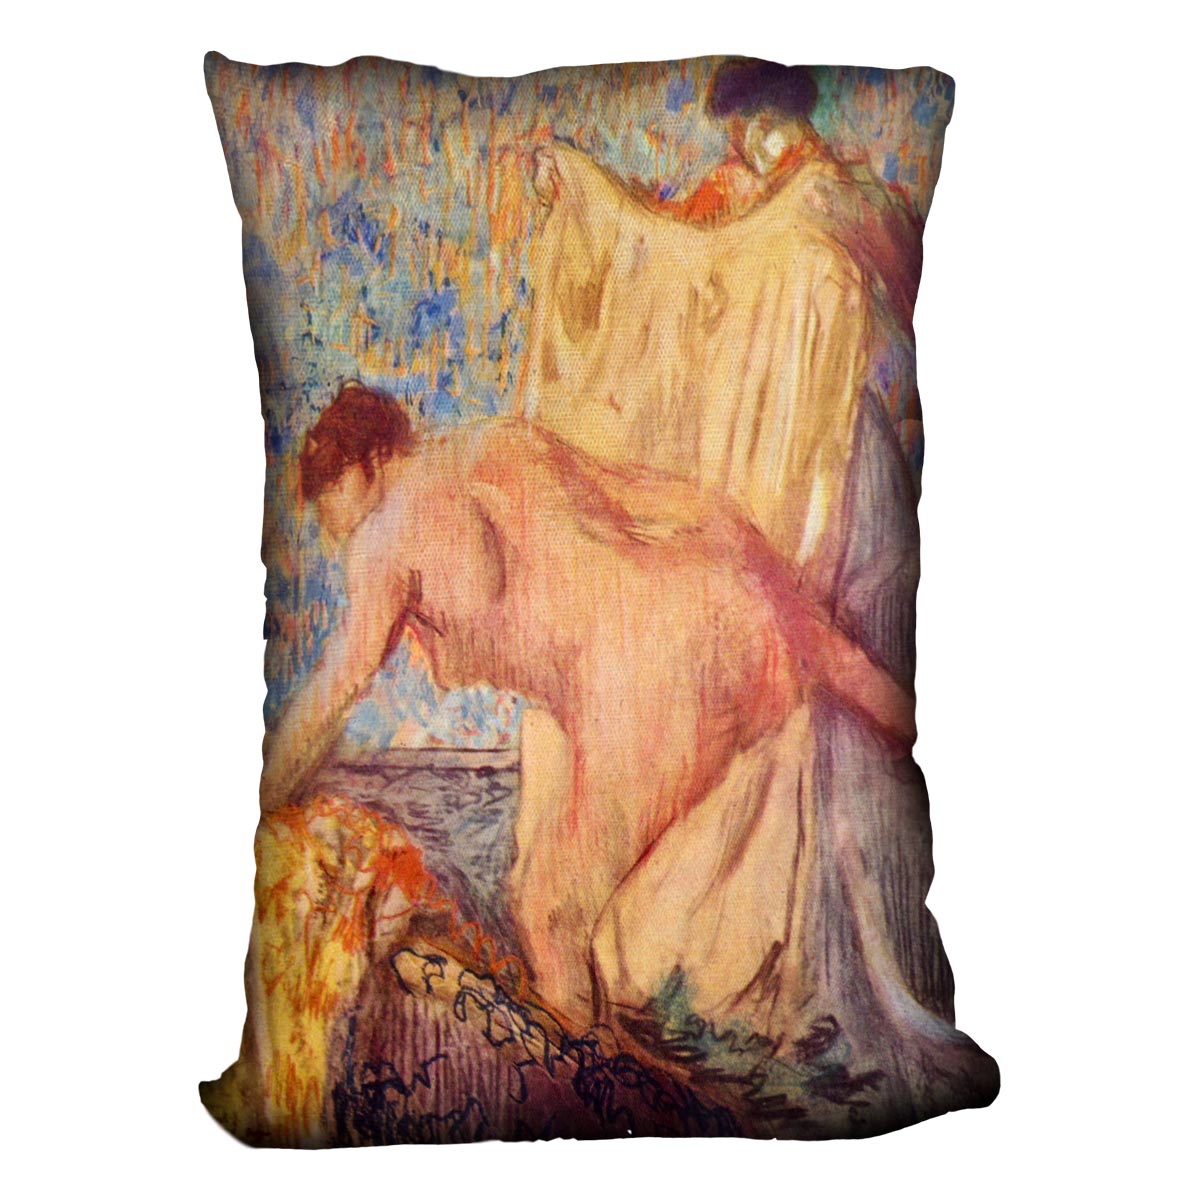 Withdrawing from the bathtub by Degas Cushion